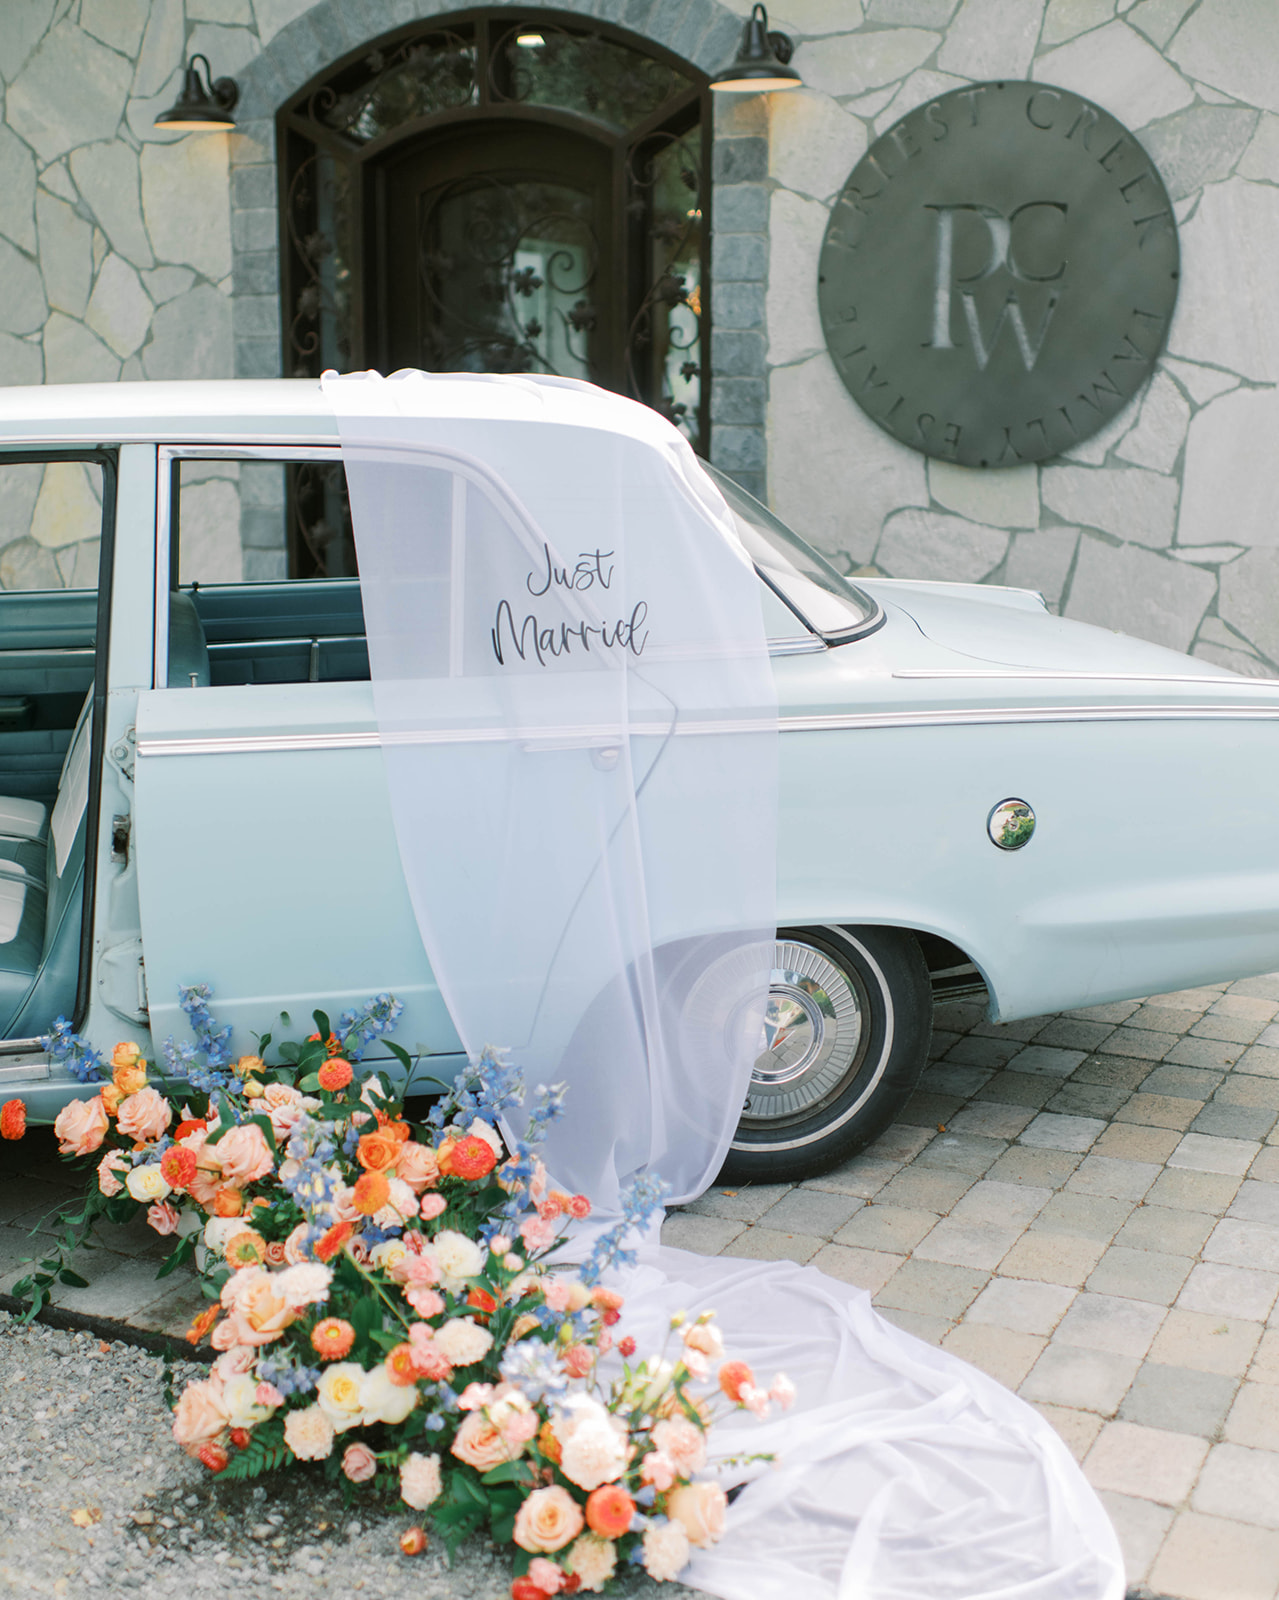 Bride's veil gracefully draped on blue vintage car with just married sign, adding a touch of romance to the getaway vehicle, lush floral arrangements adorning a classic car, transforming it into a stunning centrepiece for a vintage-inspired wedding